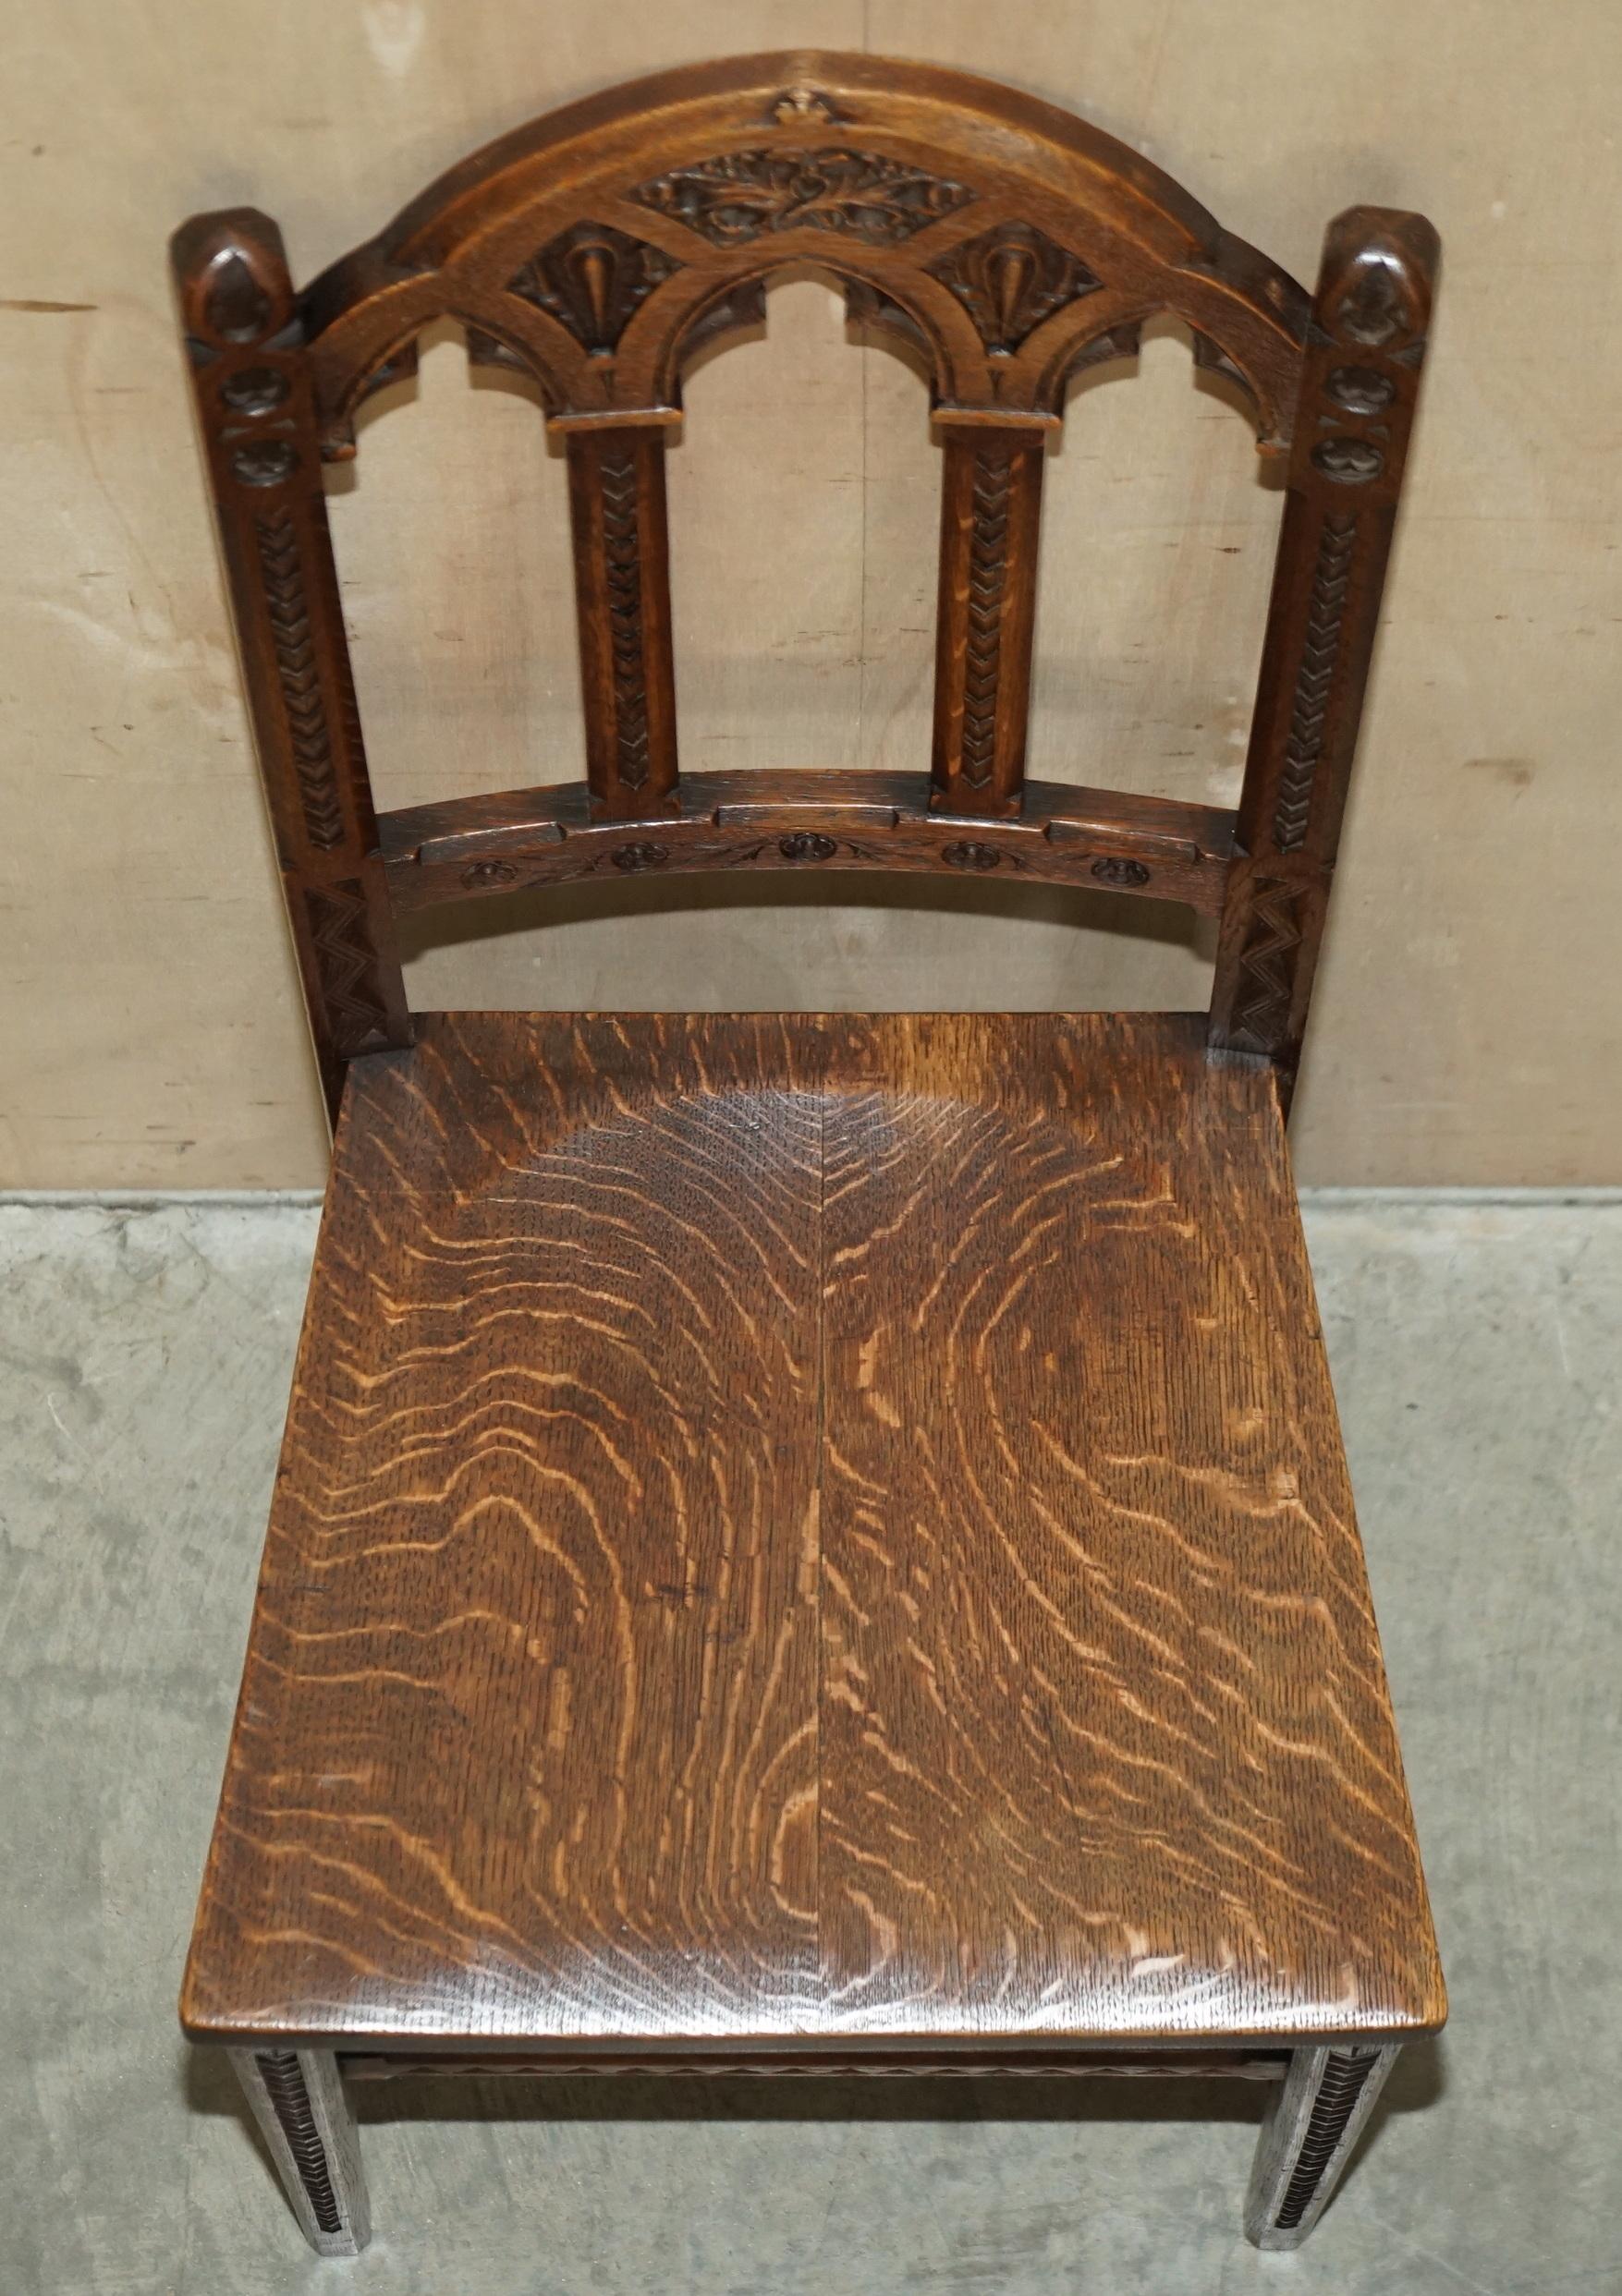 SIX ANTIQUE ORNATELY CARVED STEEPLE BACK WALNUT GOTHIC REVIVAL DiNING CHAIRS For Sale 8